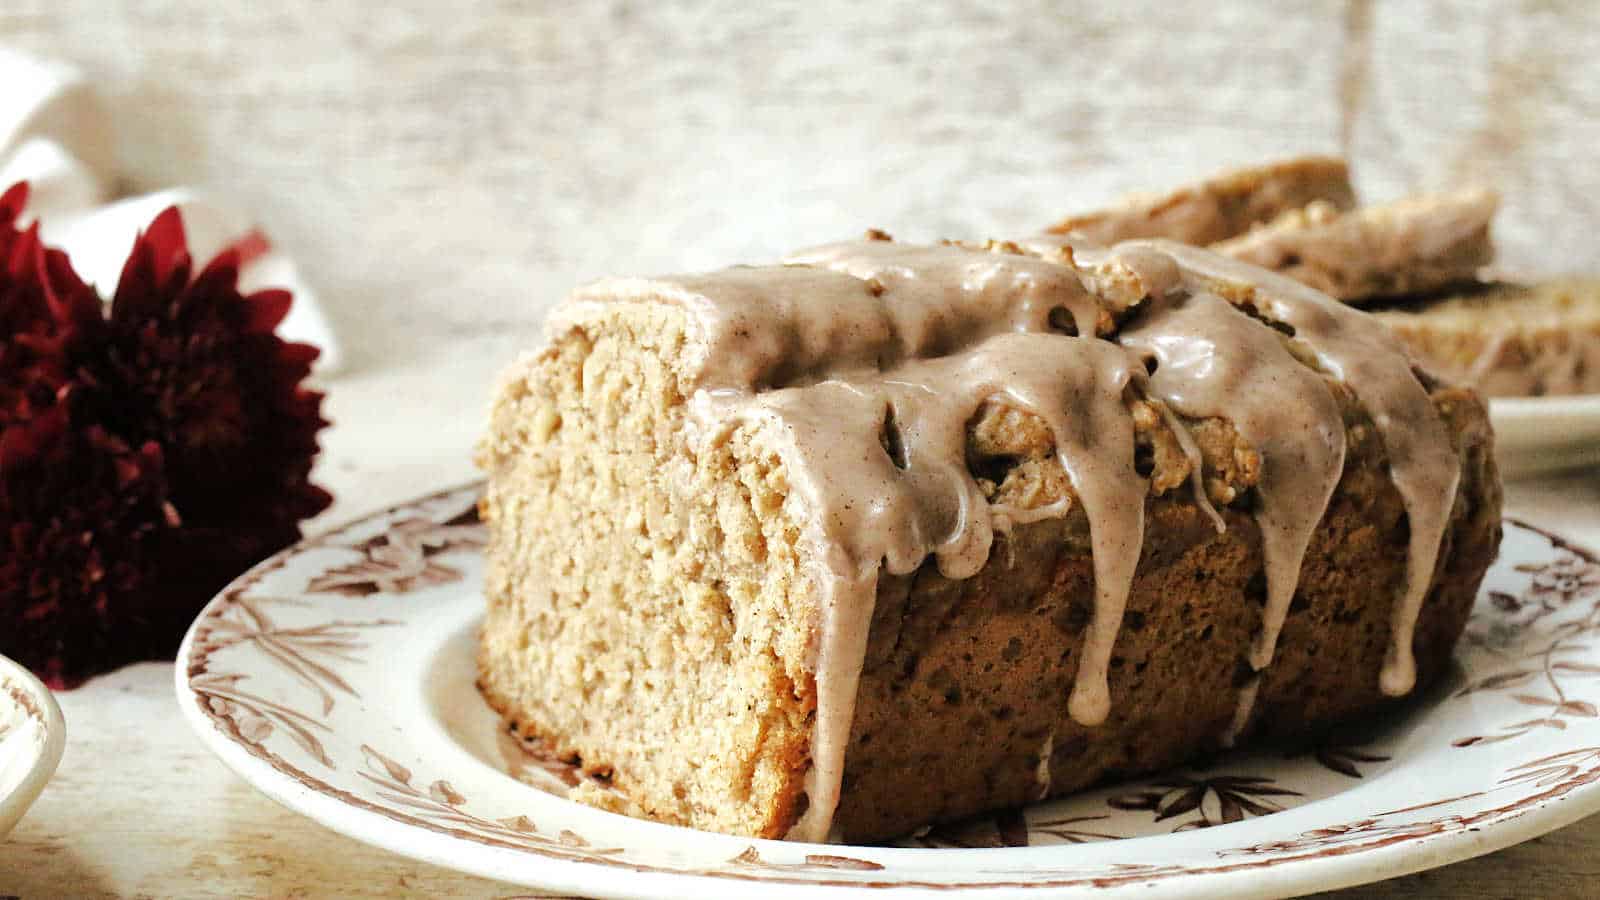 Iced Oatmeal bread on a brown and white plate.